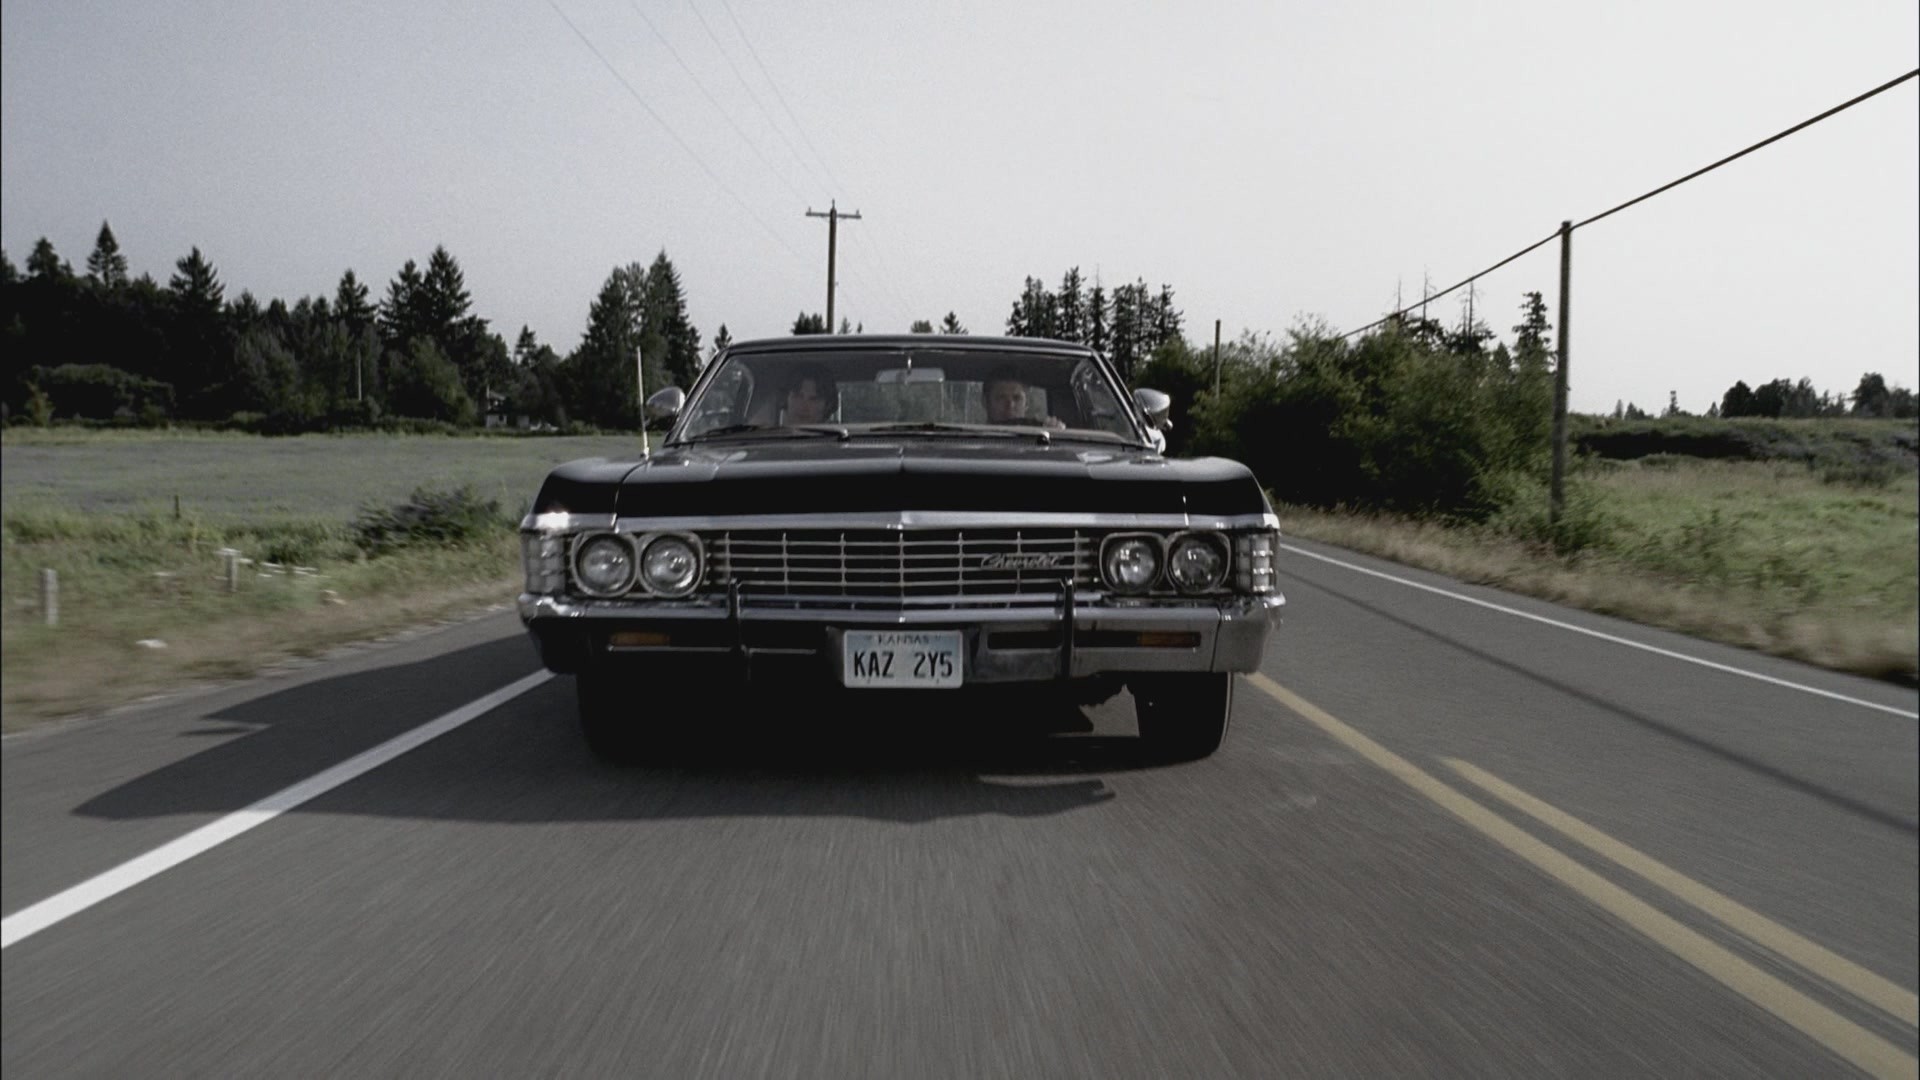 1920x1080 then the newly repaired Impala roars down the road!